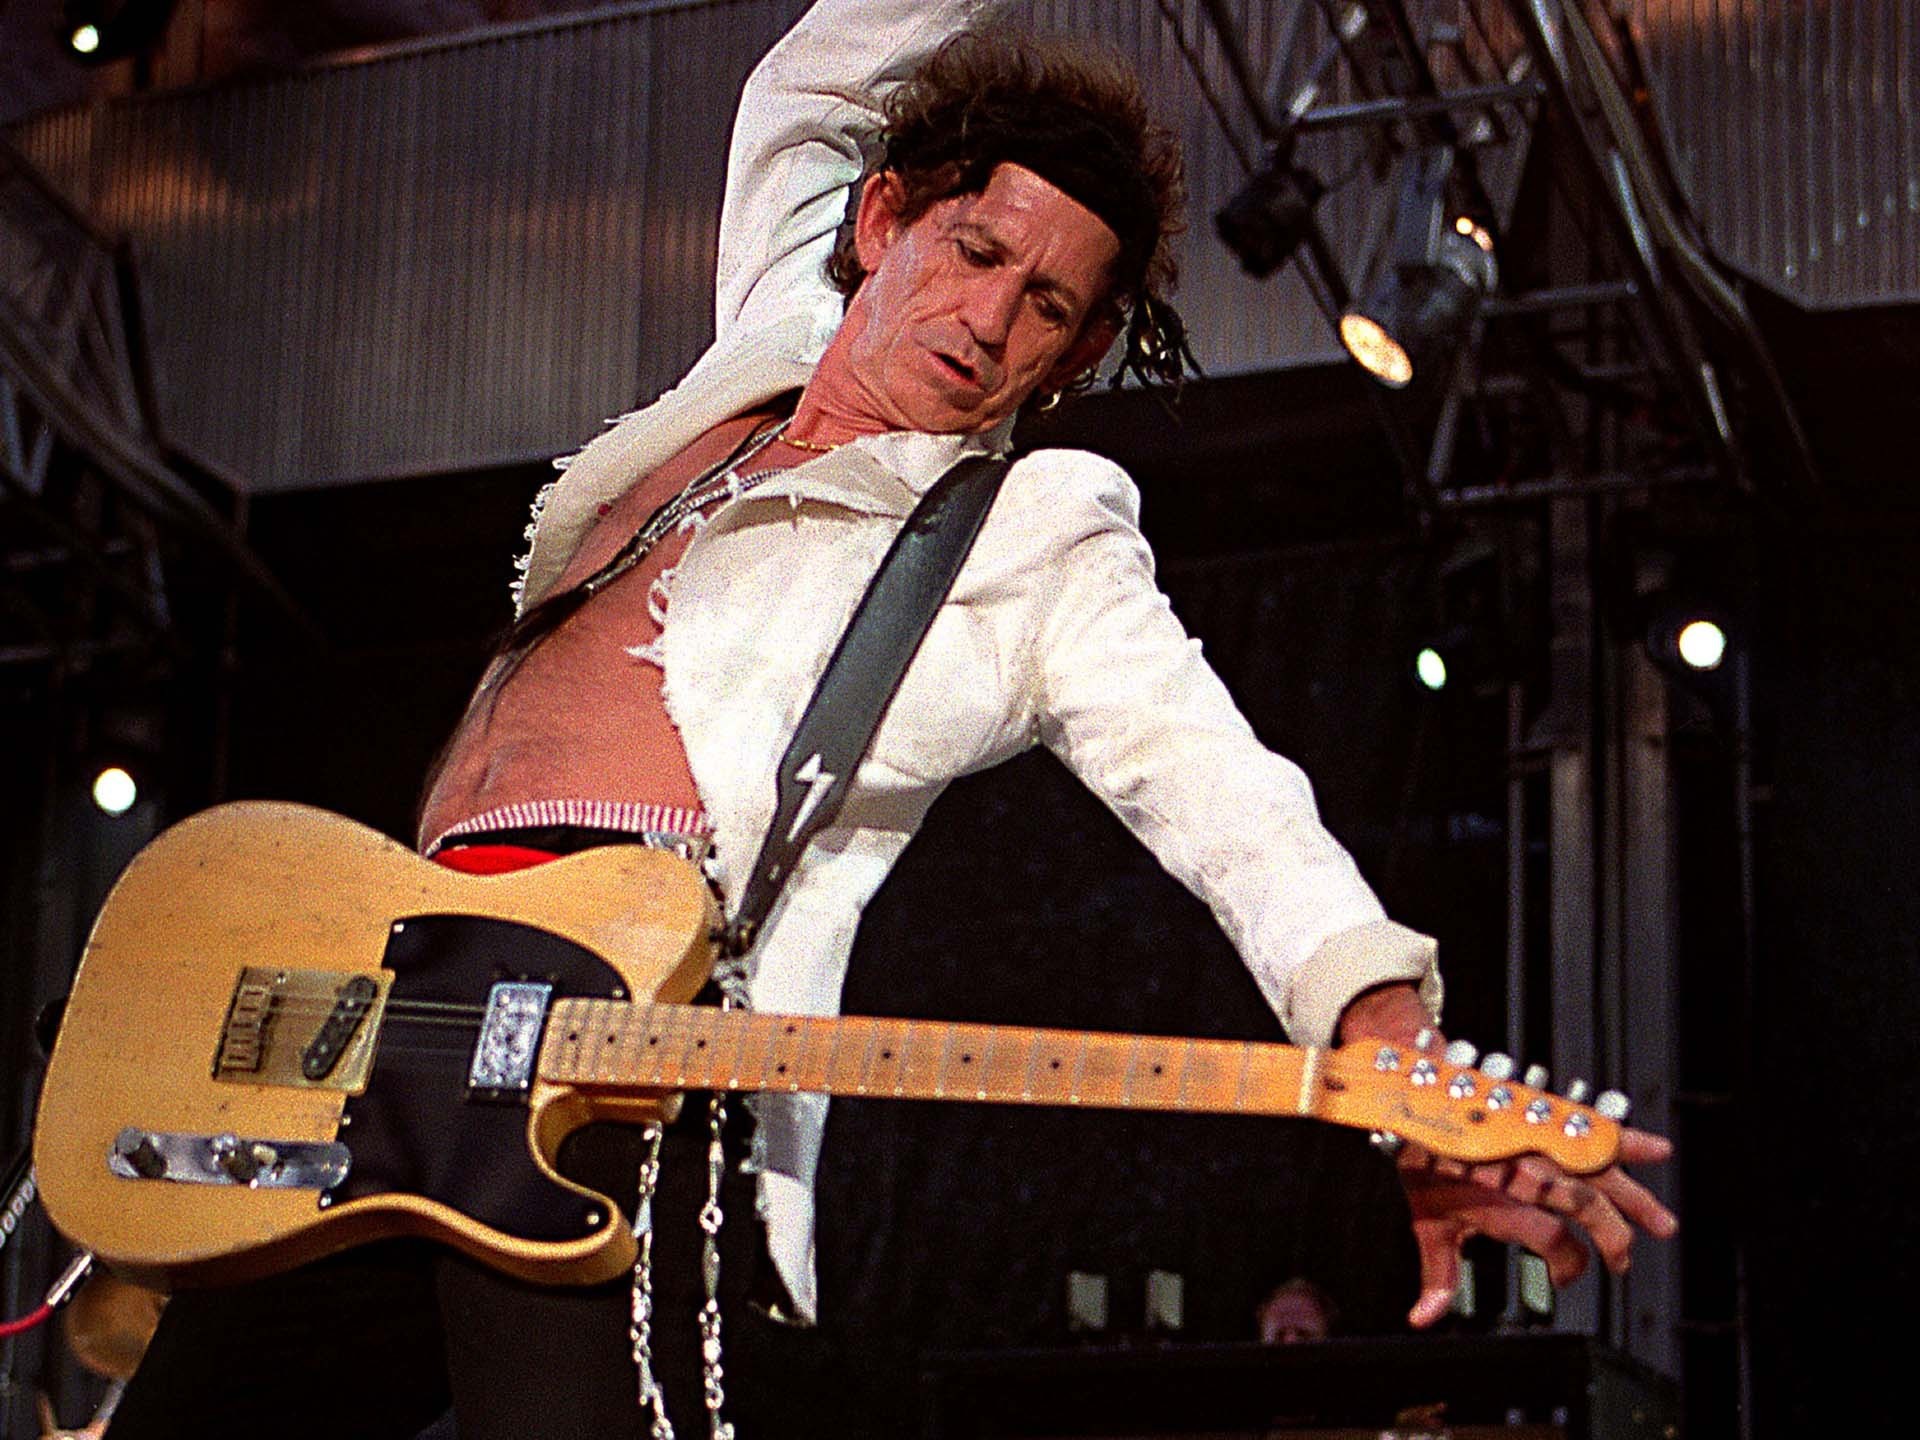 1920x1440 #60741, Images for Desktop: keith richards picture